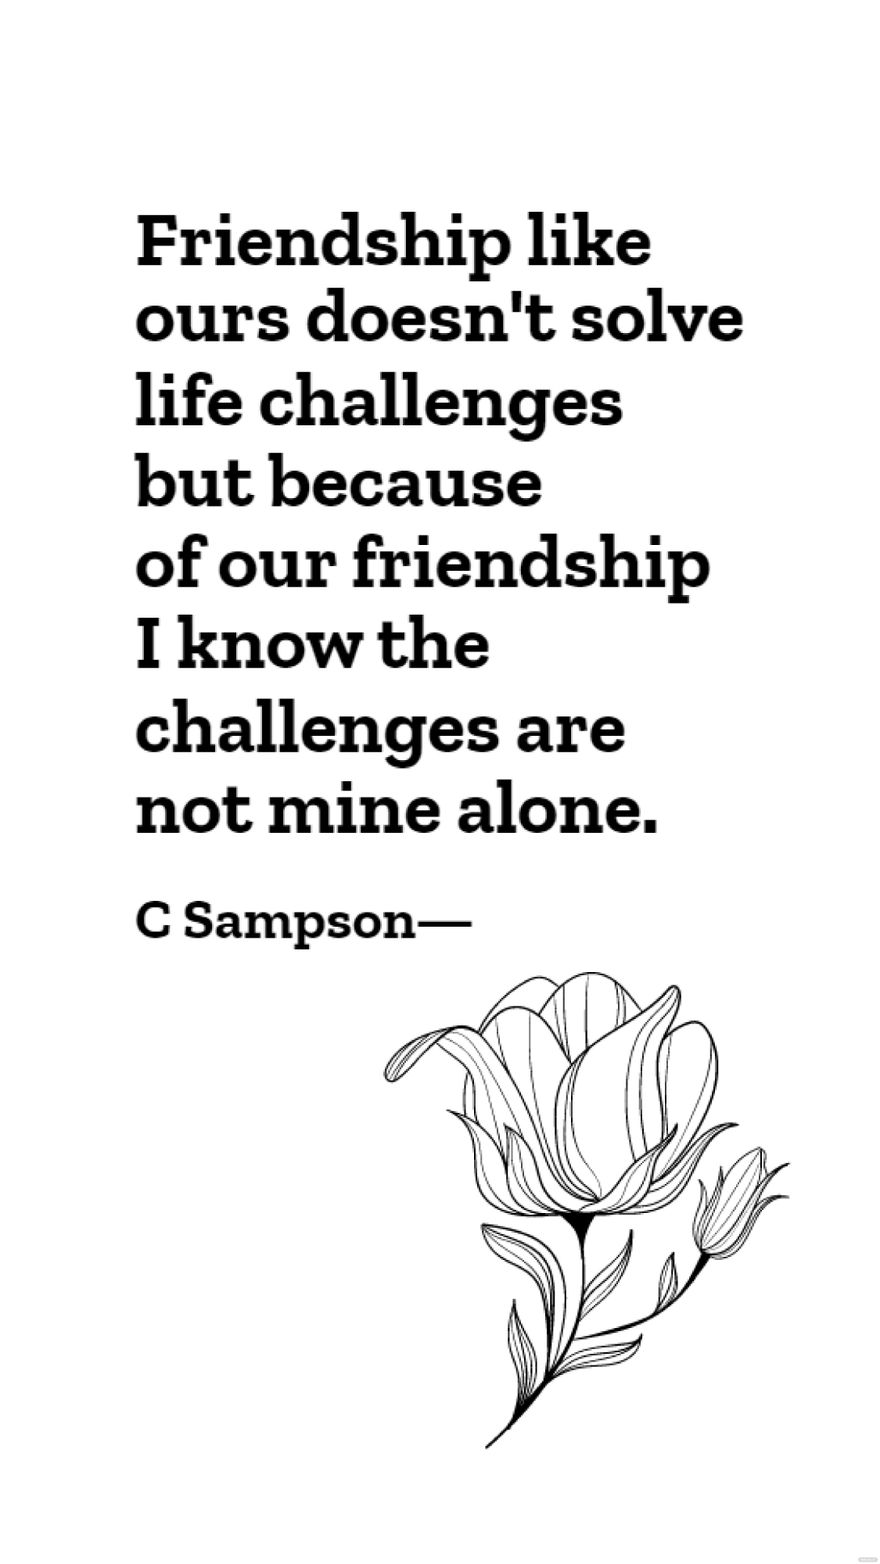 C Sampson - Friendship like ours doesn't solve life challenges but because of our friendship I know the challenges are not mine alone.